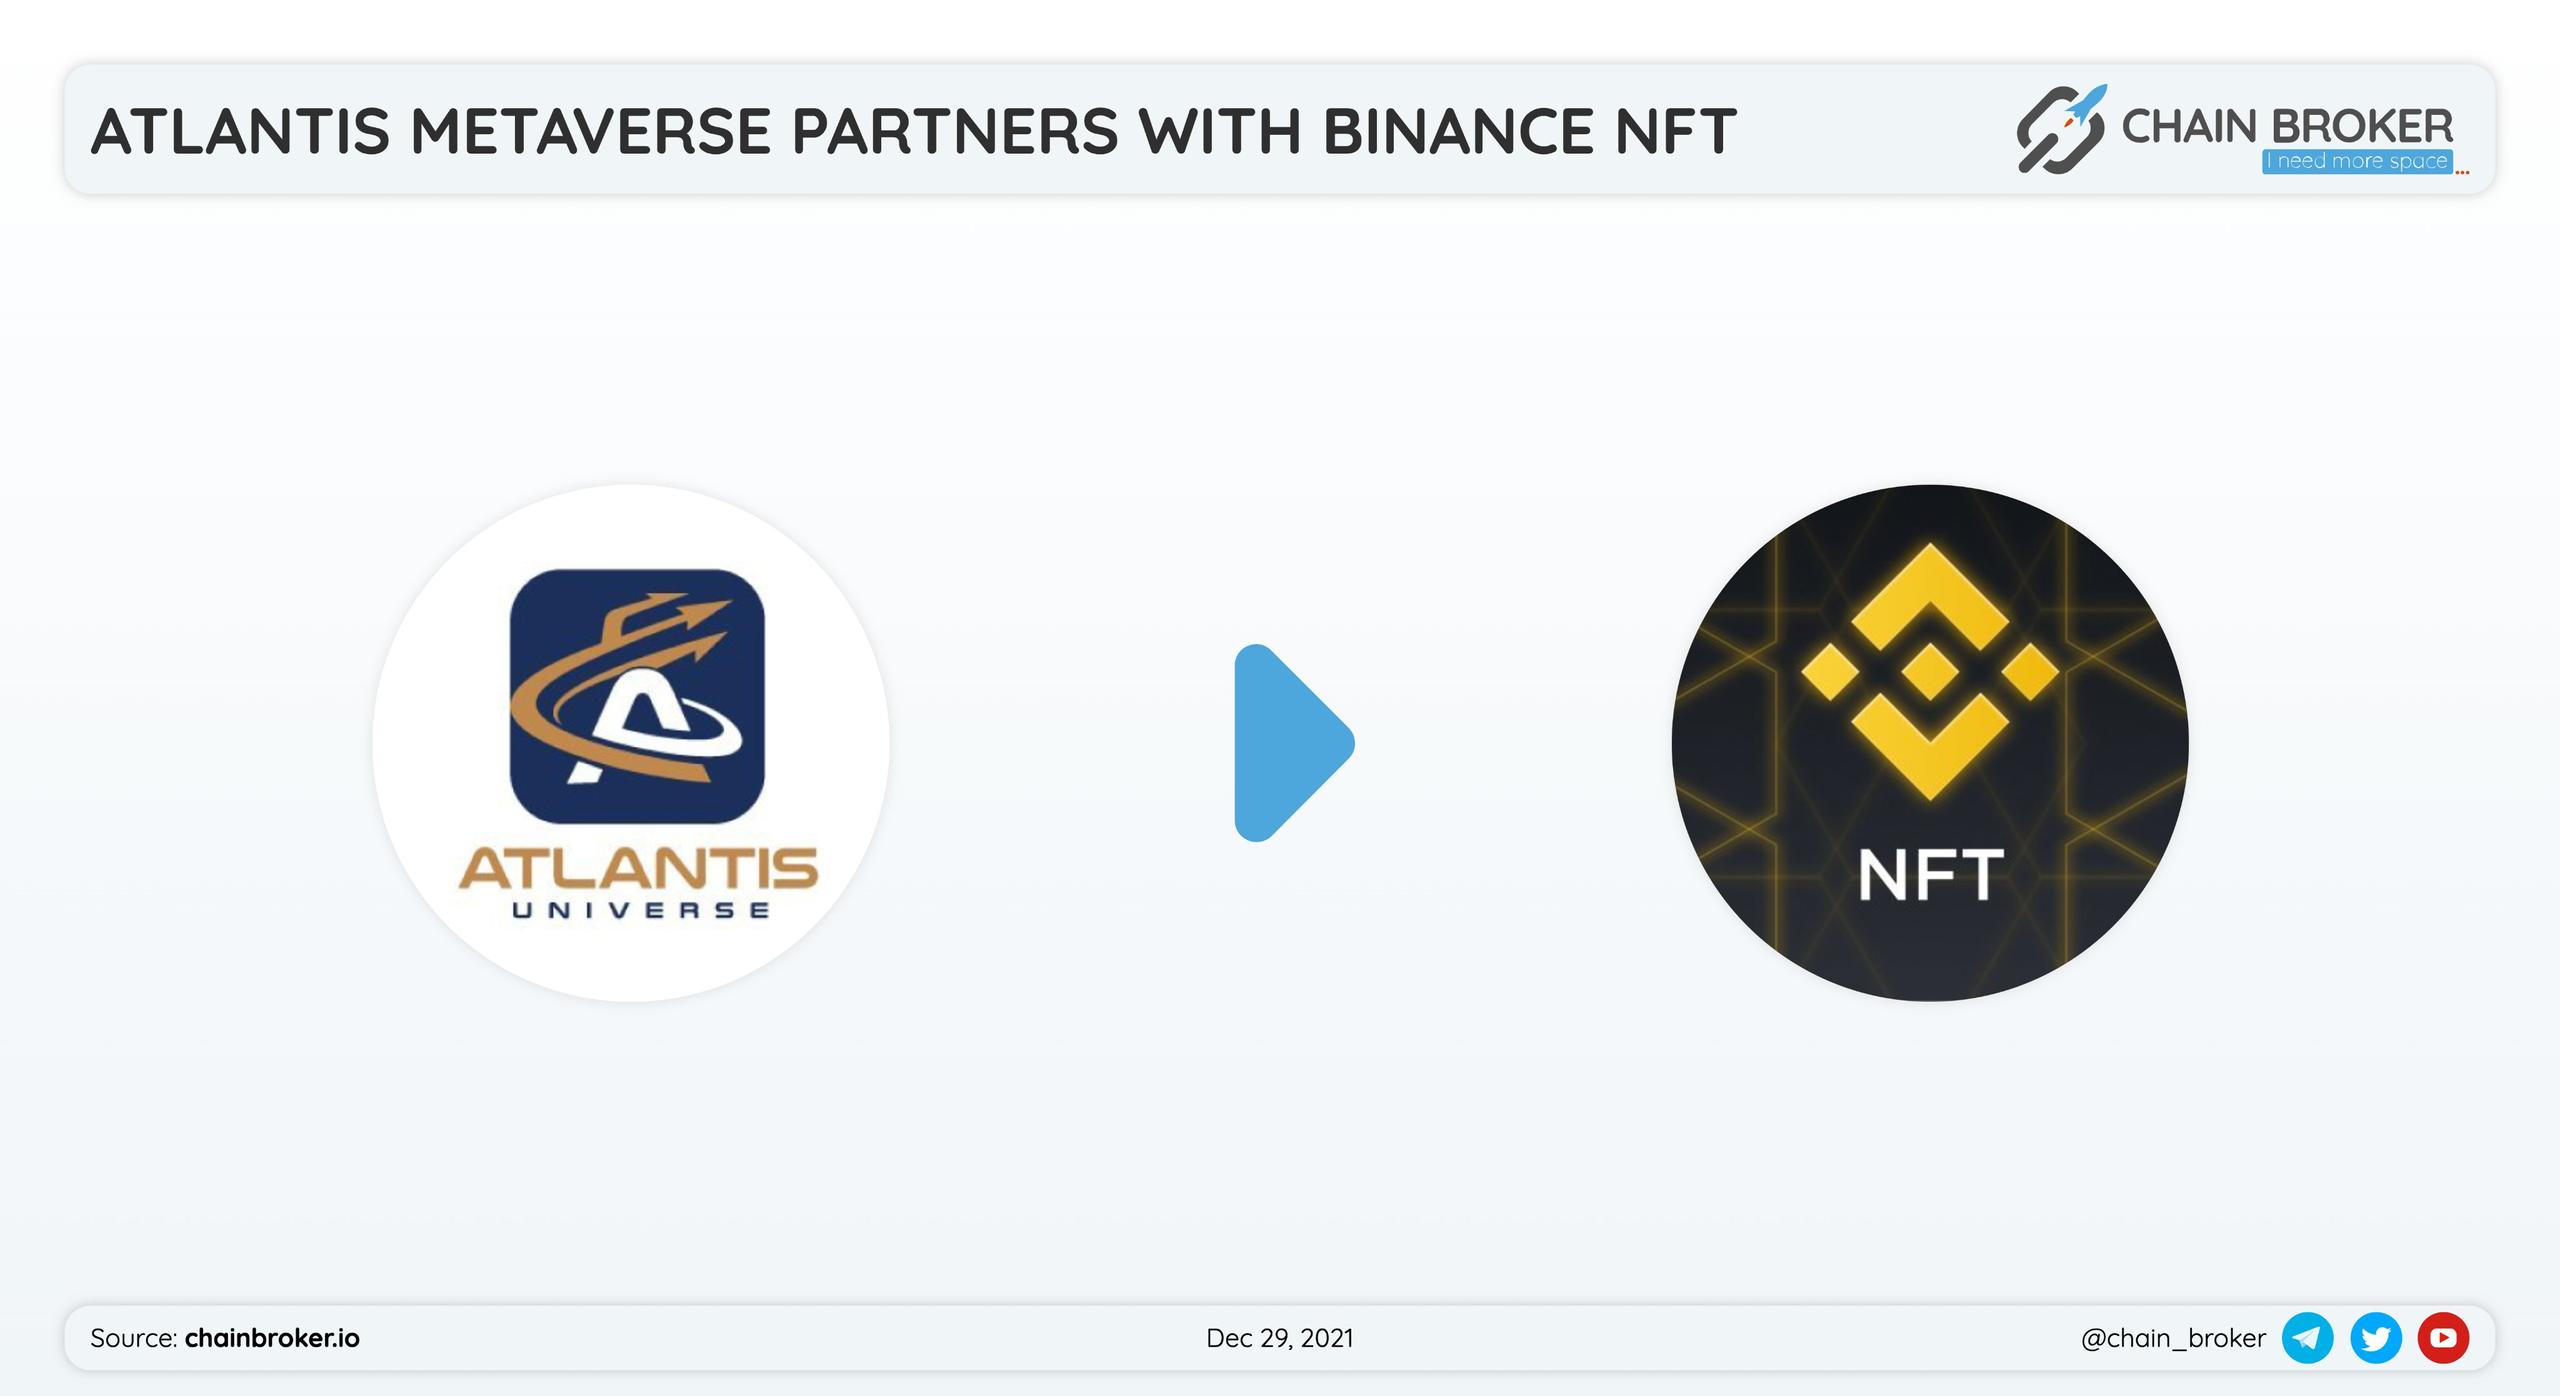 Atlantis has partnered with BinanceNFT to accelerate #NFTs on their Marketplace.